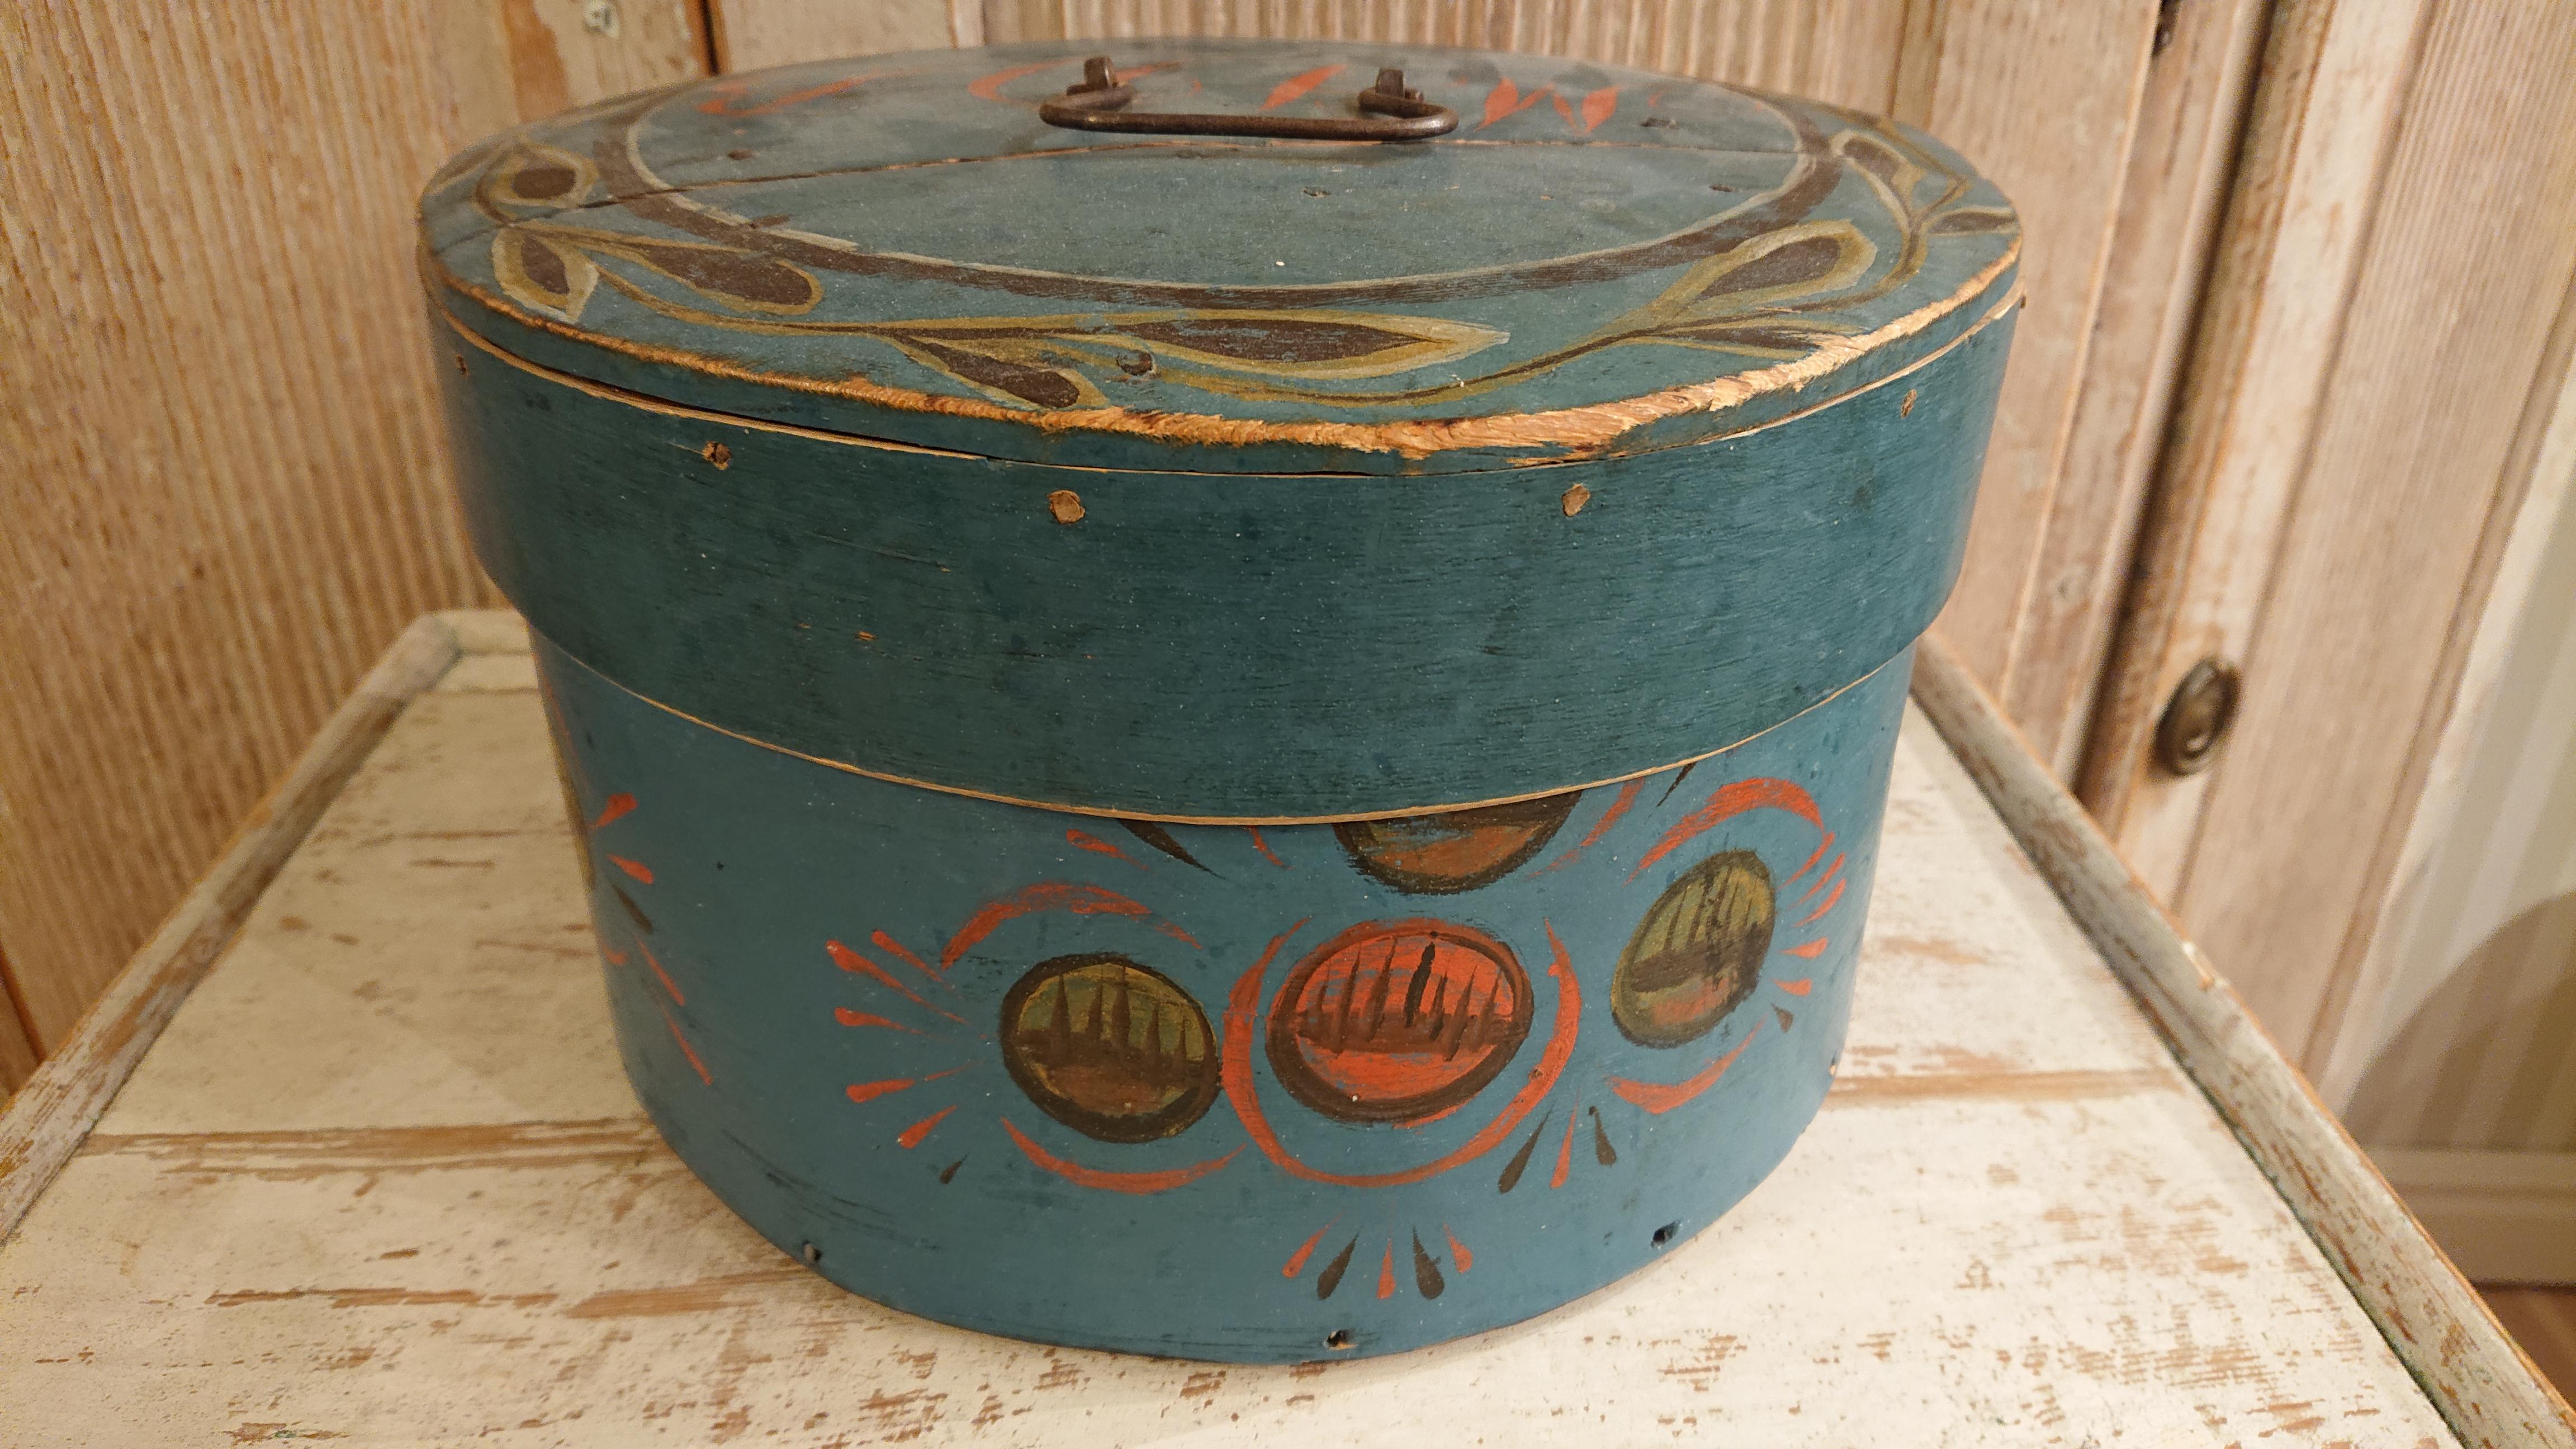 19th century Bentwood box from Jämtland, Northern Sweden.
Fantastic fine Bentwood box with untouched original paint.
Nice decorative painting on the box.
Monogram & leaf loop on the Lid.
Valuables were stored in these boxes.
There is a small